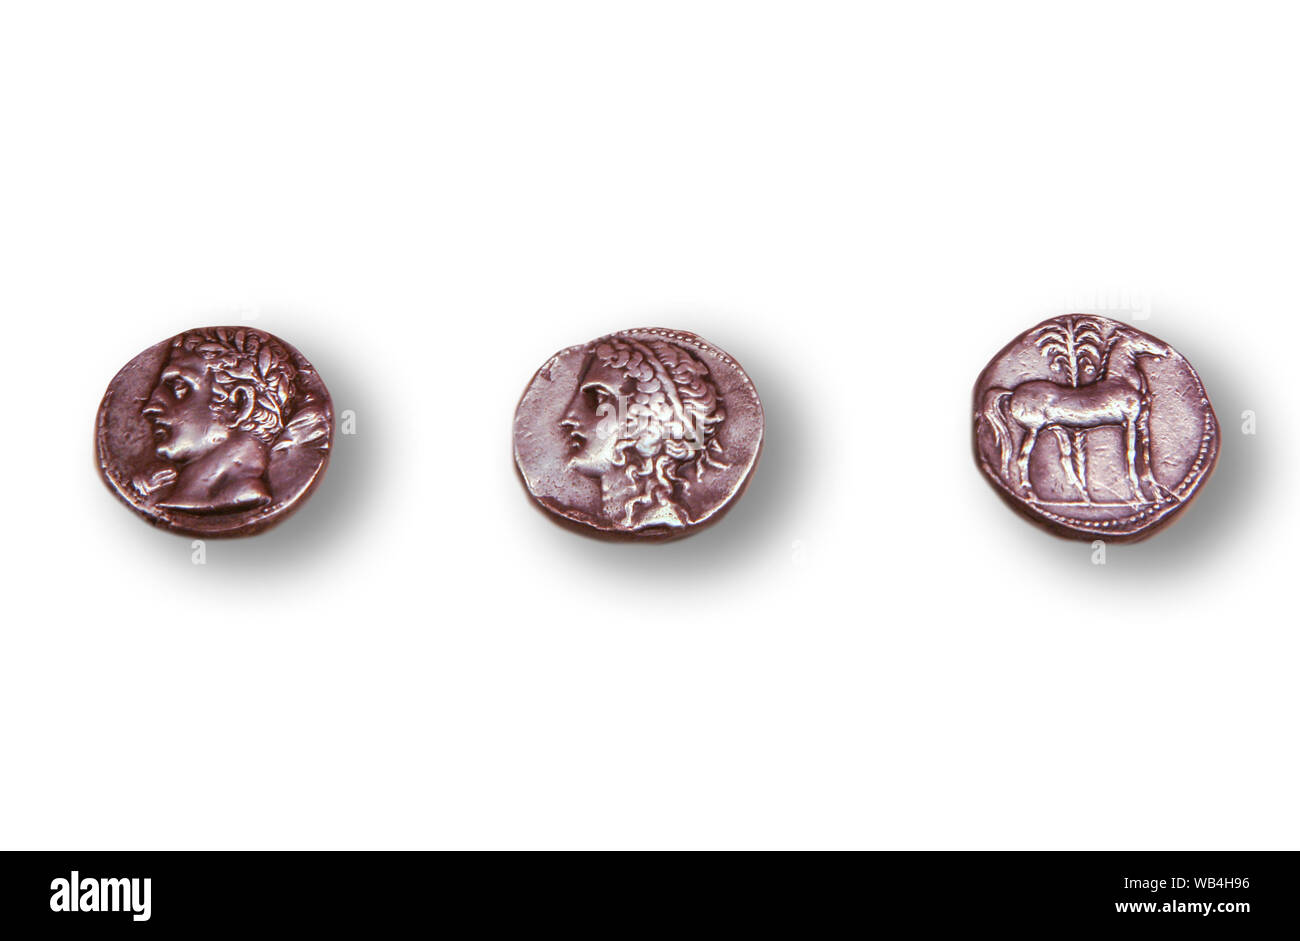 Madrid, Spain- April 20th, 2008: 3 Carthaginian coins. Isolated over white. National Archeological Museum in Madrid, Spain Stock Photo